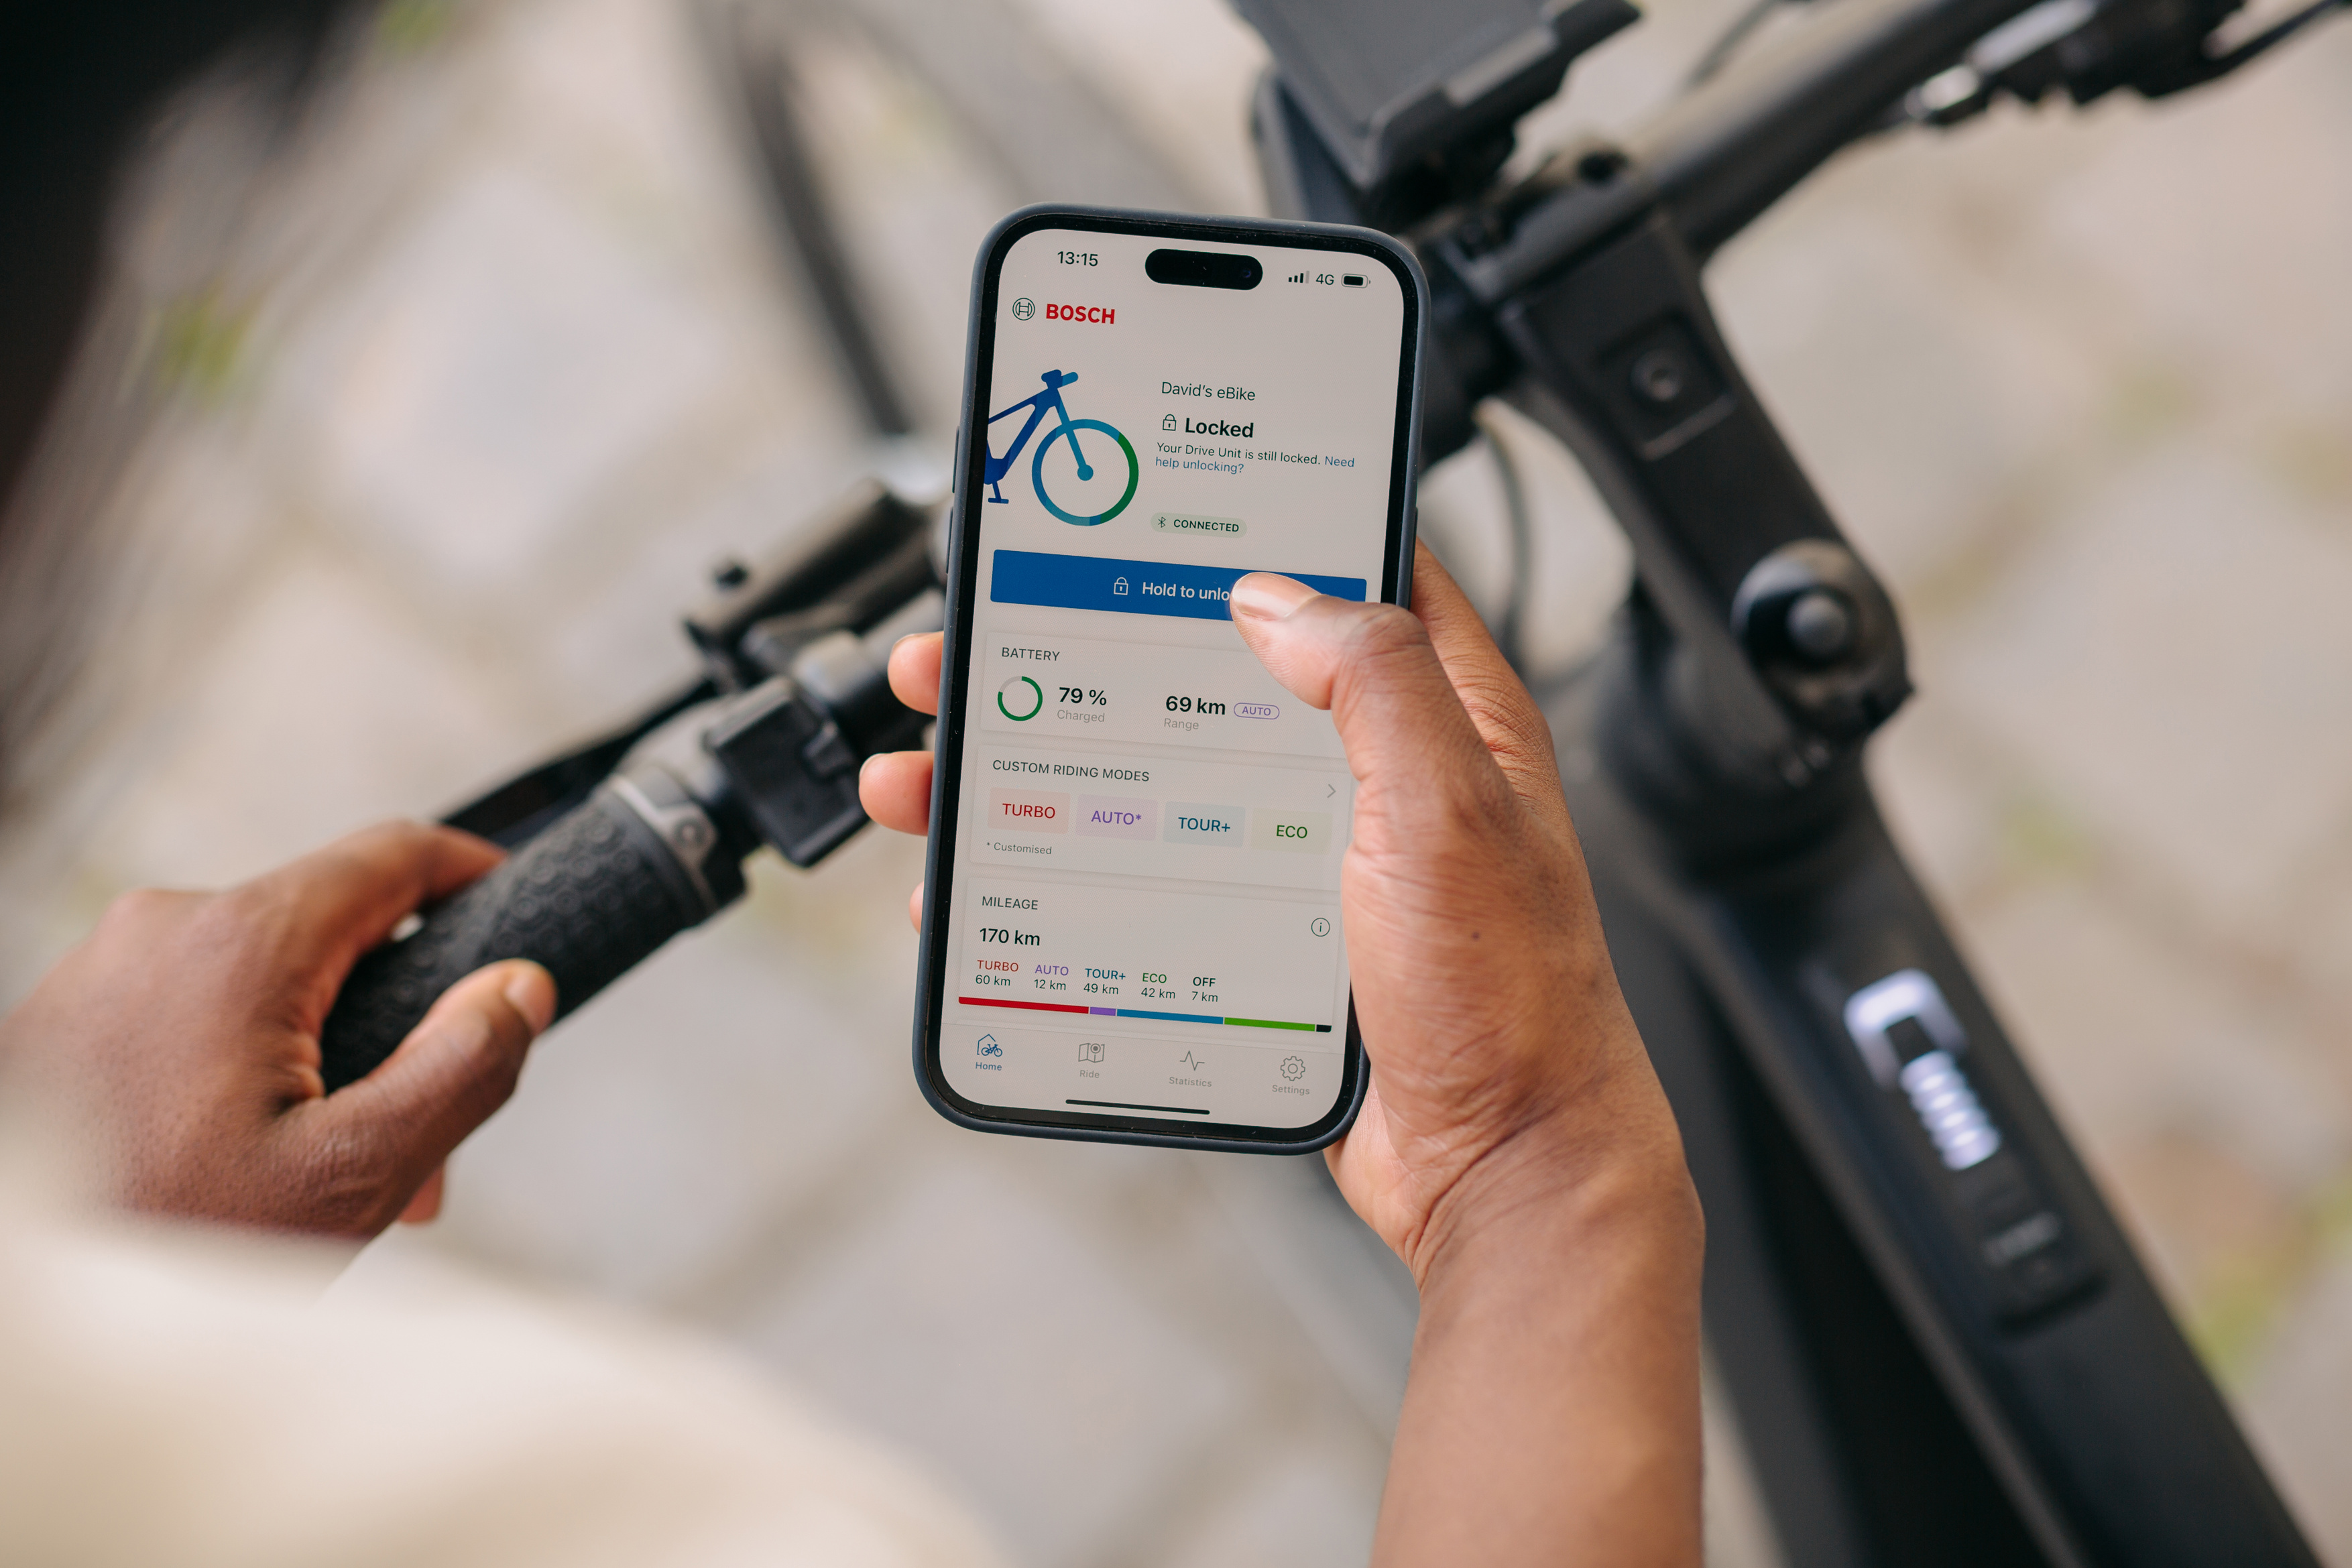 Additional theft protection: parking the eBike with complete confidence